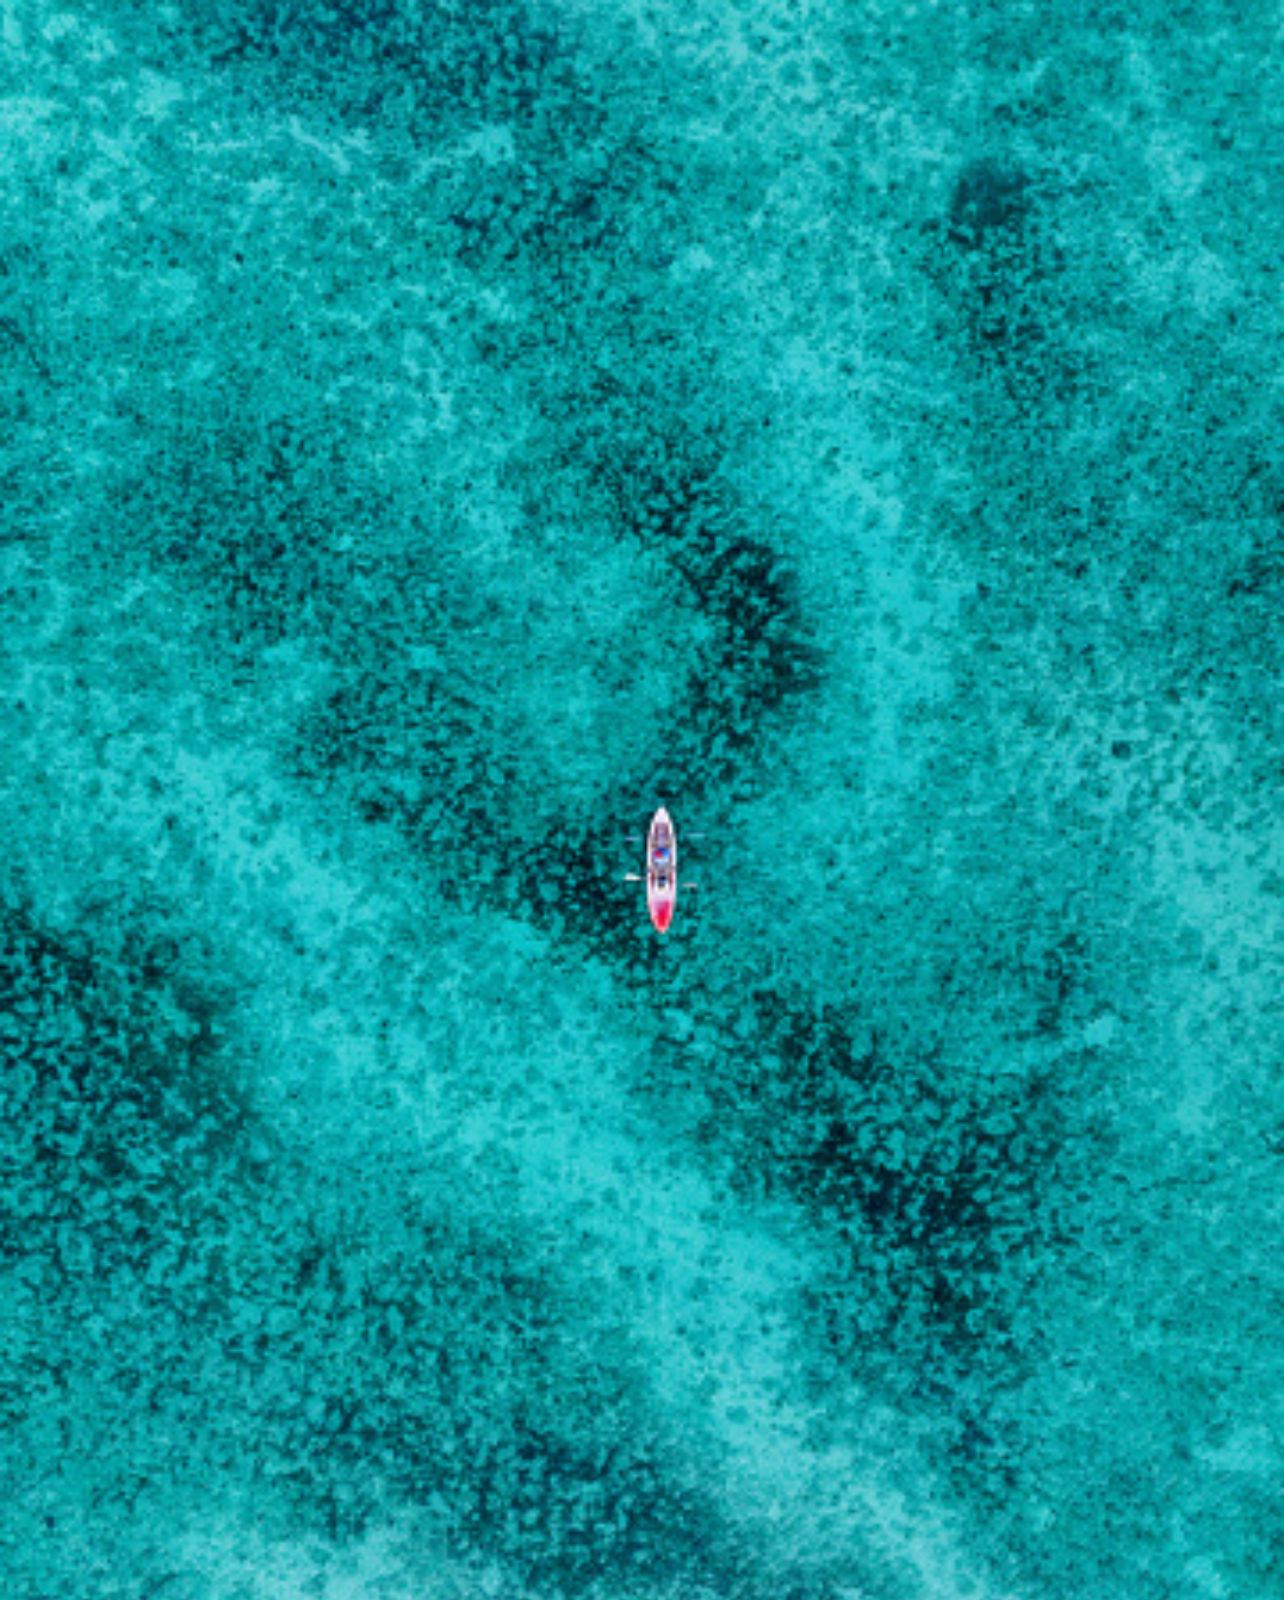 Aerial view of The Coast of Nassau, New Providence, Bahamas, with a Kayak